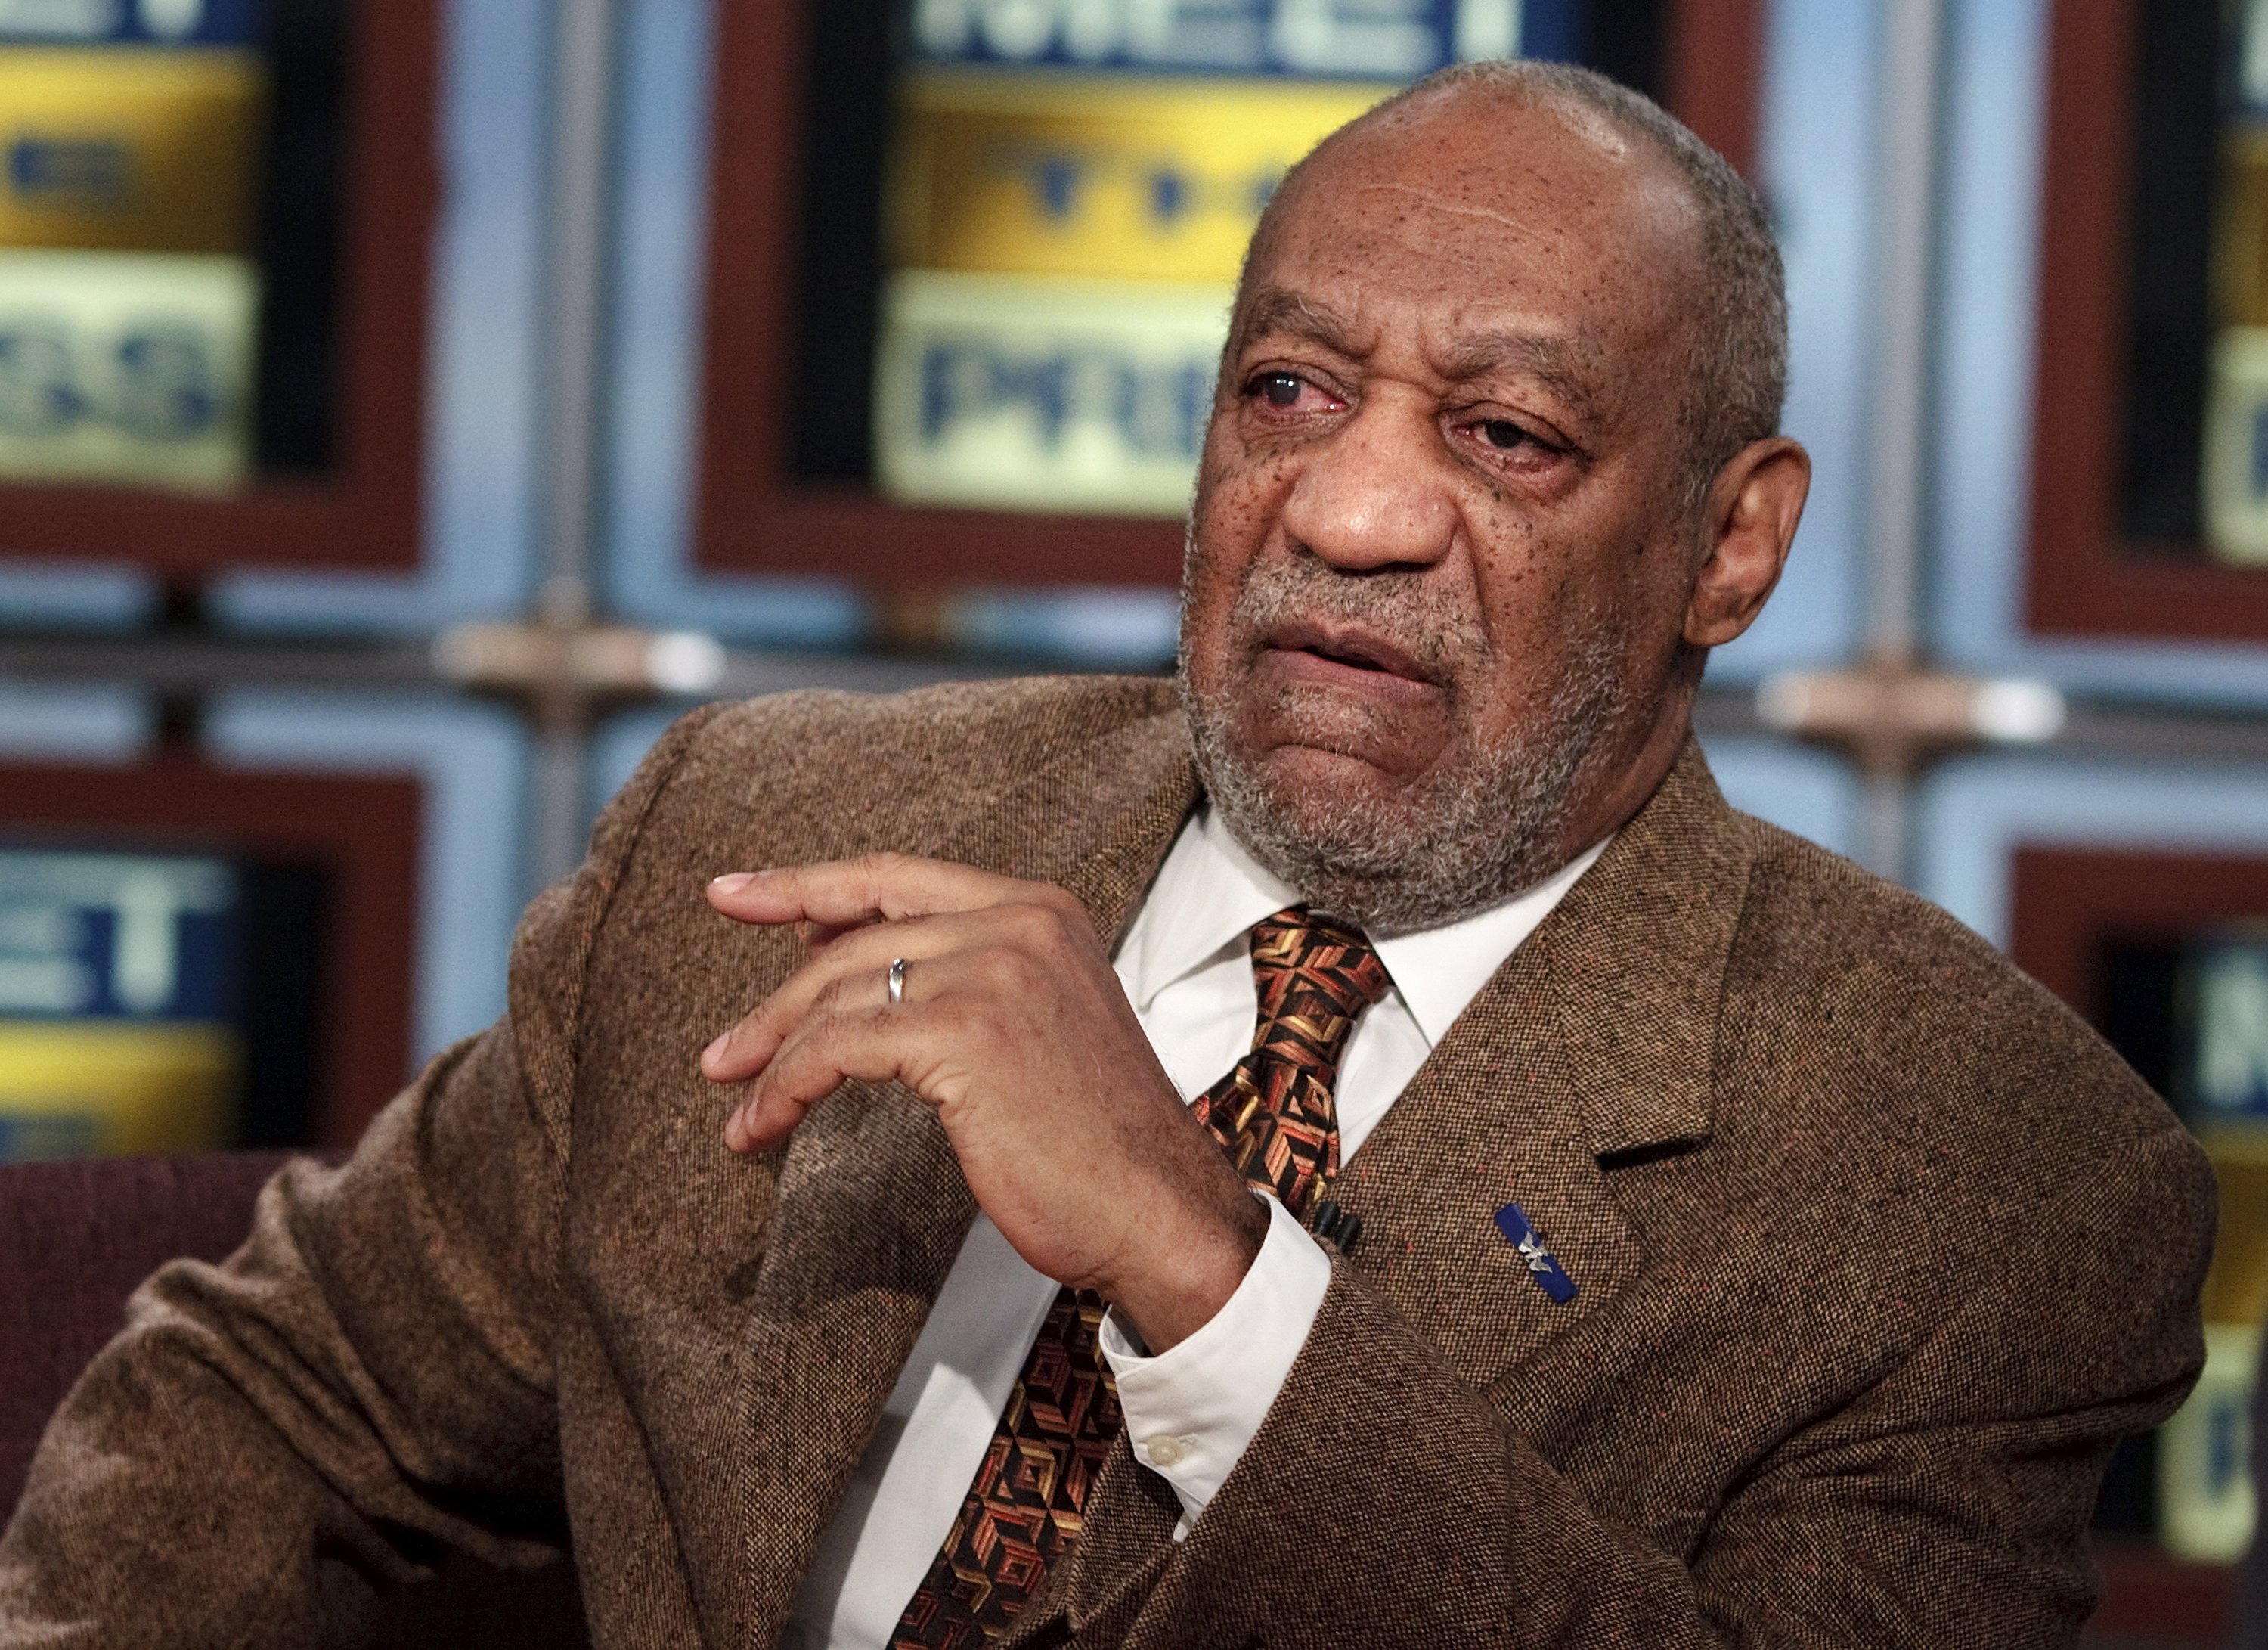 Bill Cosby speaks during a live taping of 'Meet the Press' at the NBC studios January 11, 2009, in Washington, DC. | Source: Getty Images.